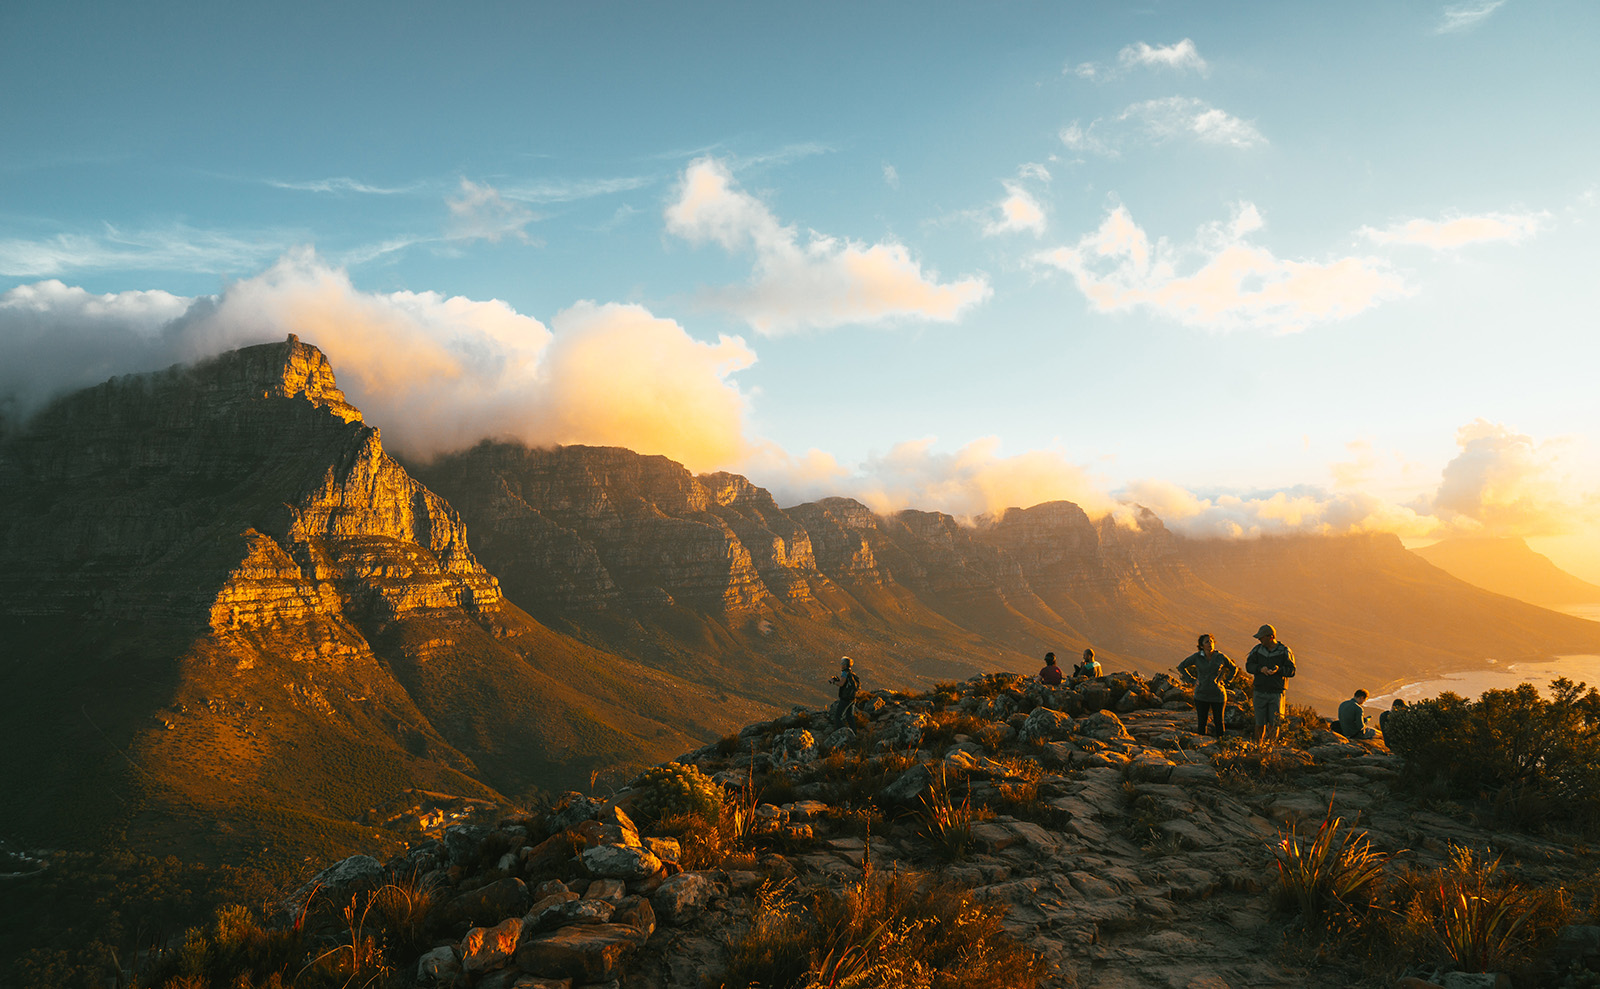 14 Colorful, Delicious, Outdoorsy Reasons to Take a Holiday in South Africa